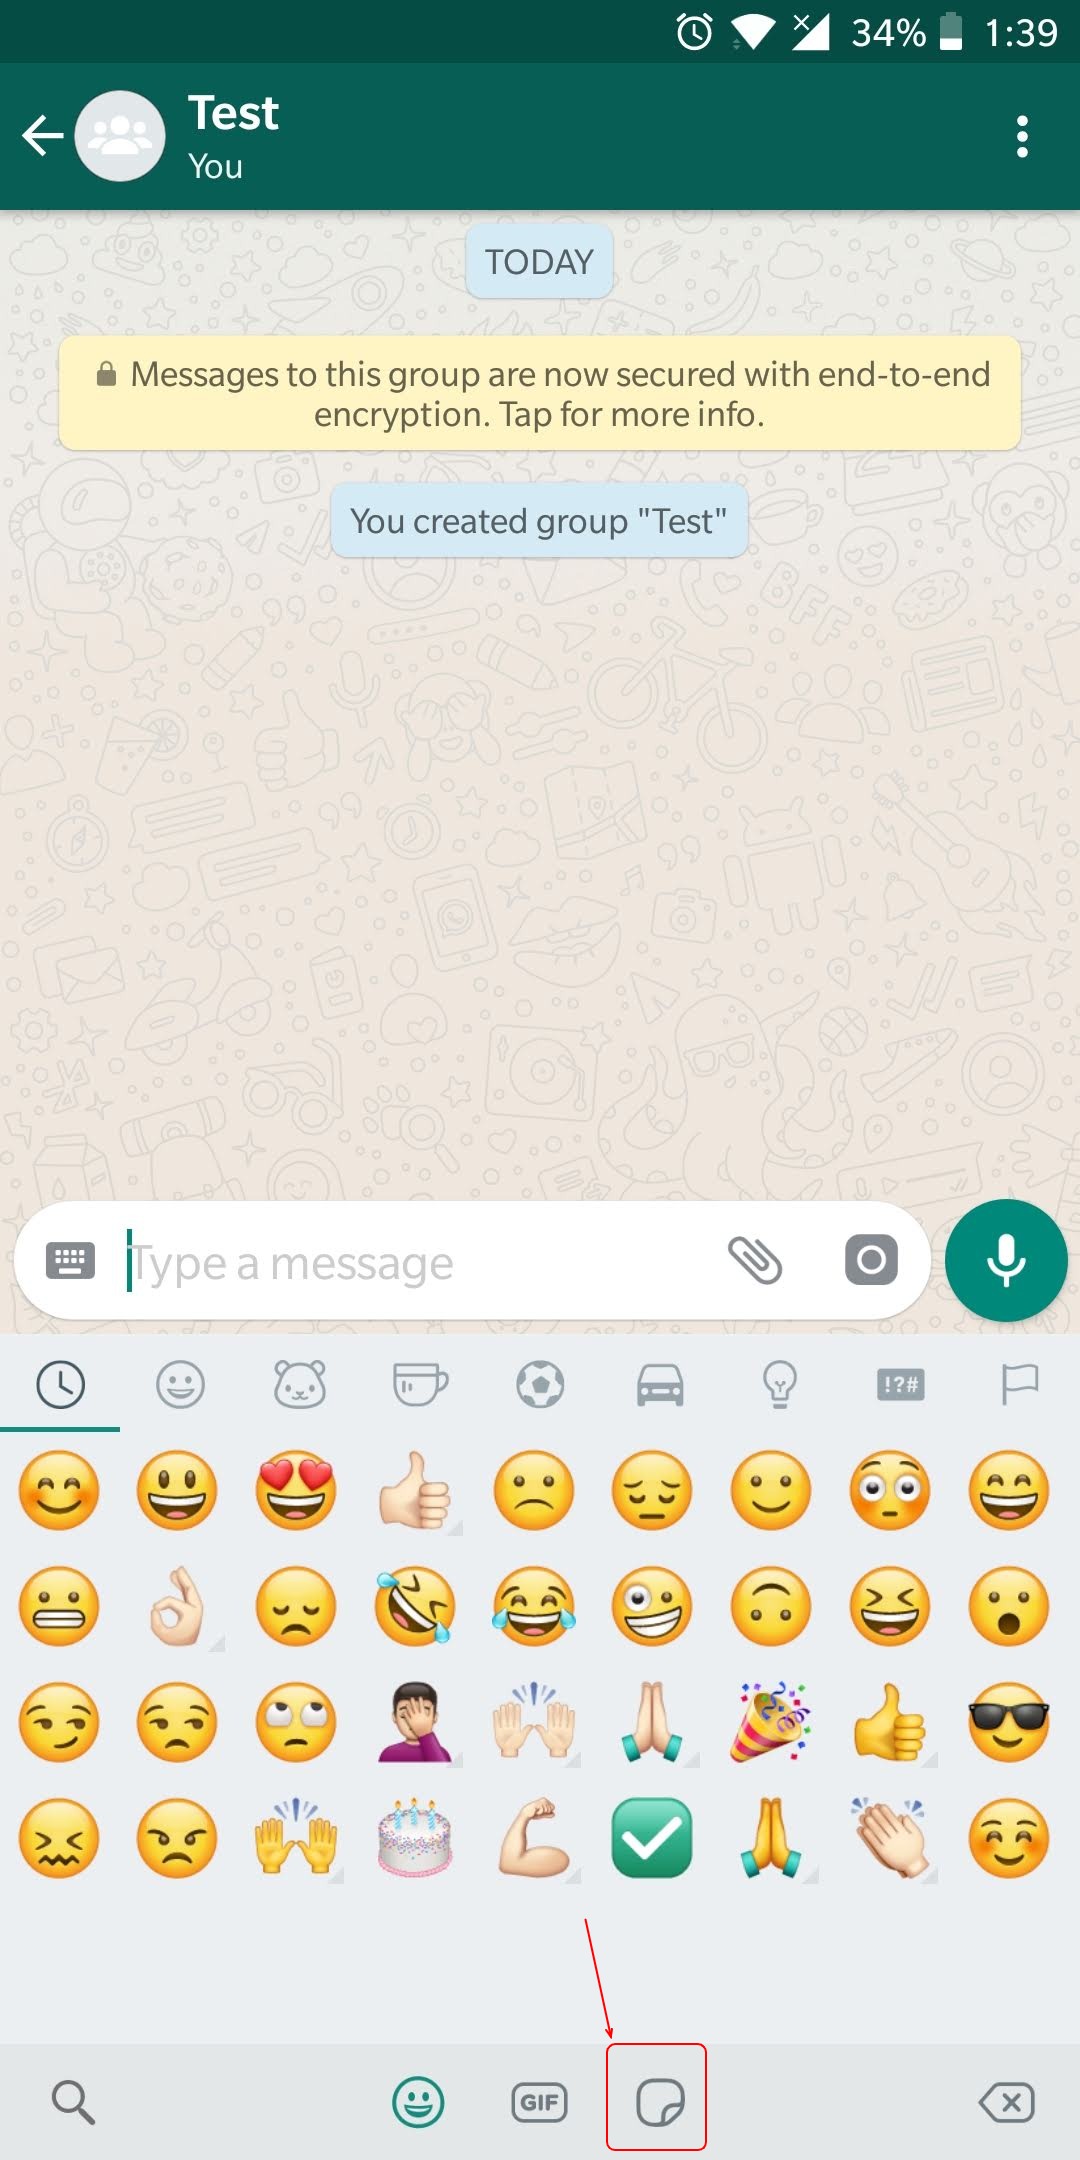 How to Send WhatsApp Stickers on Android | DroidViews